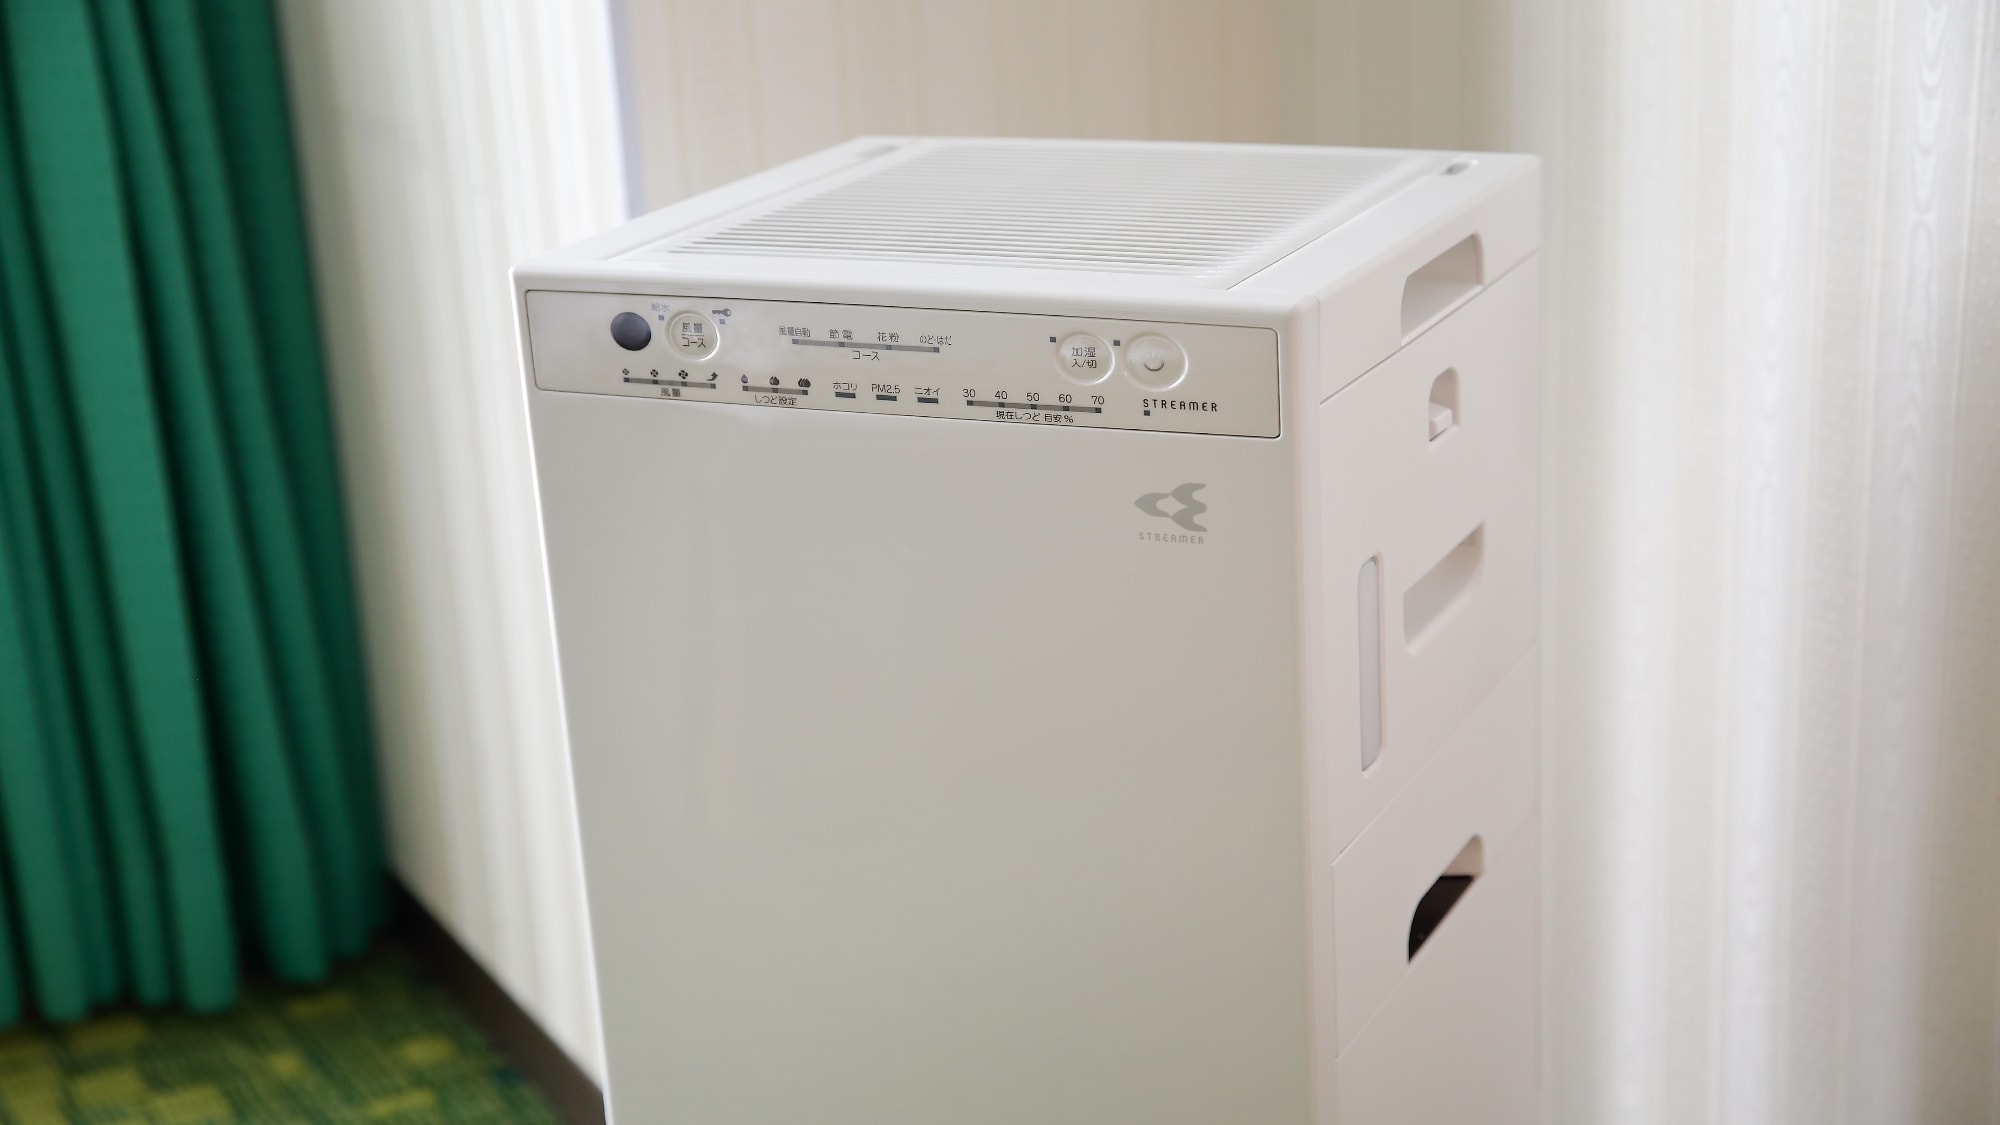 ◆ Guest room facilities: Humidified air purifier